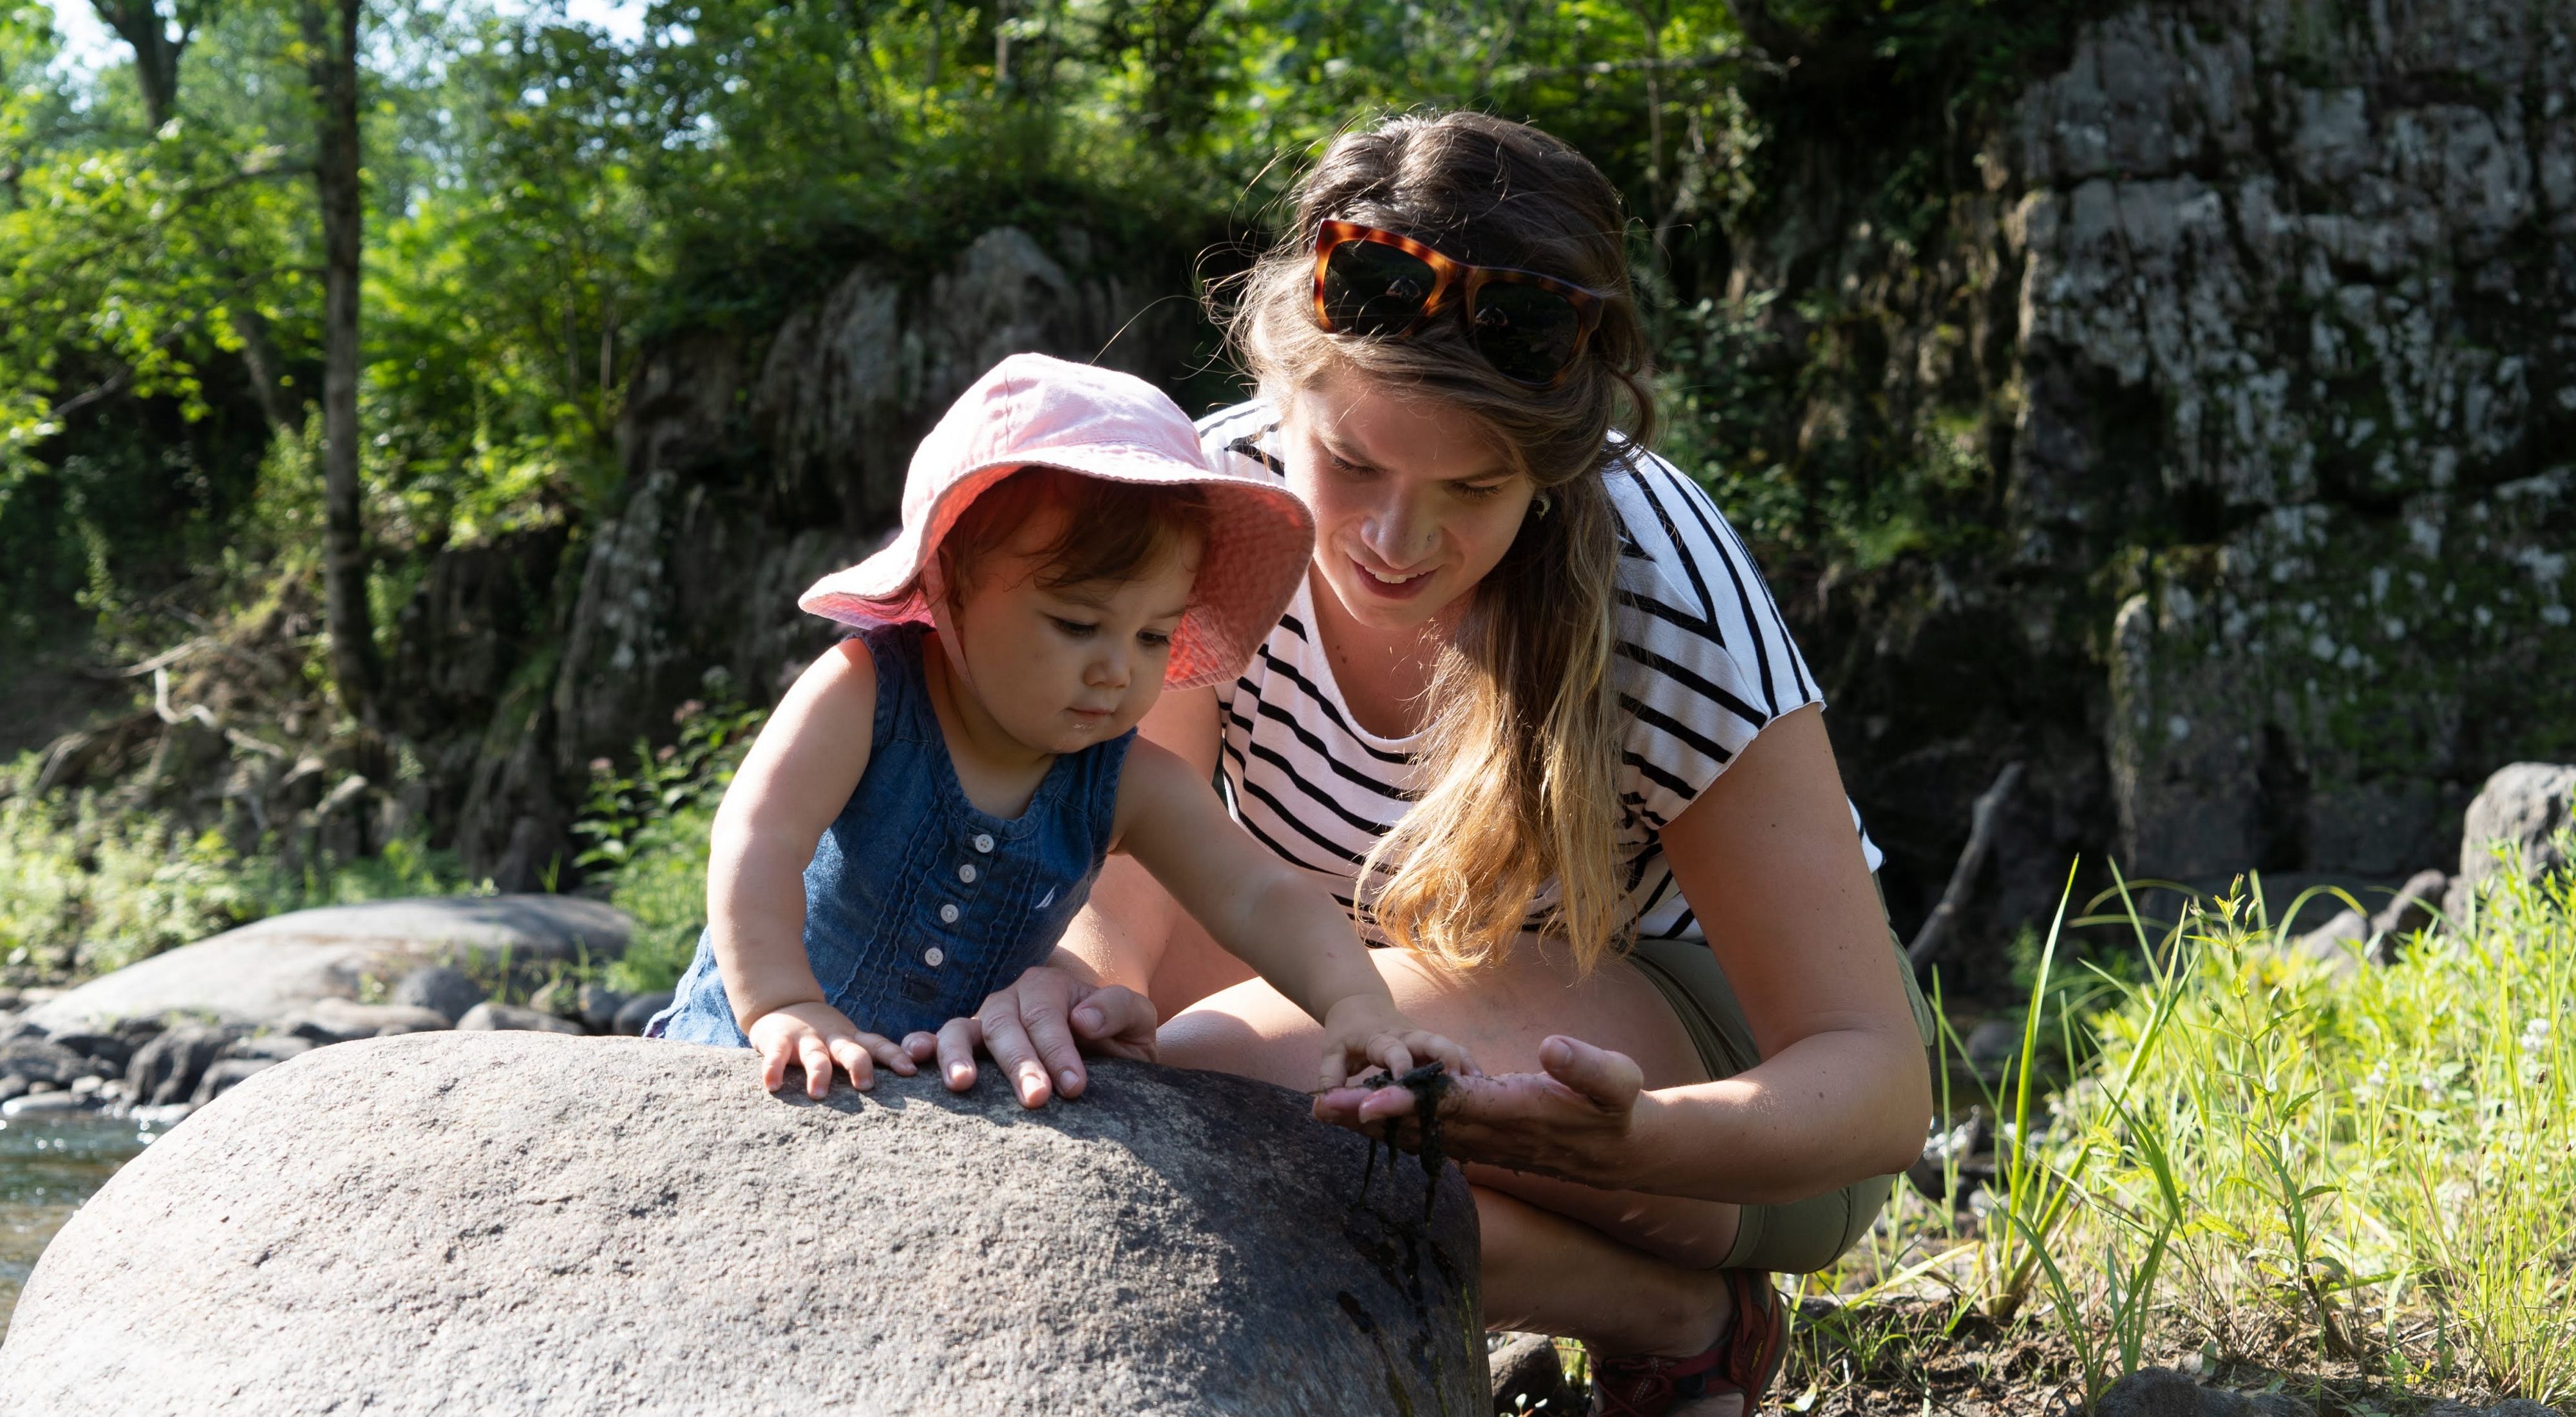 TNC fisheries scientist shows her young daughter how to inspect rocks along a river.